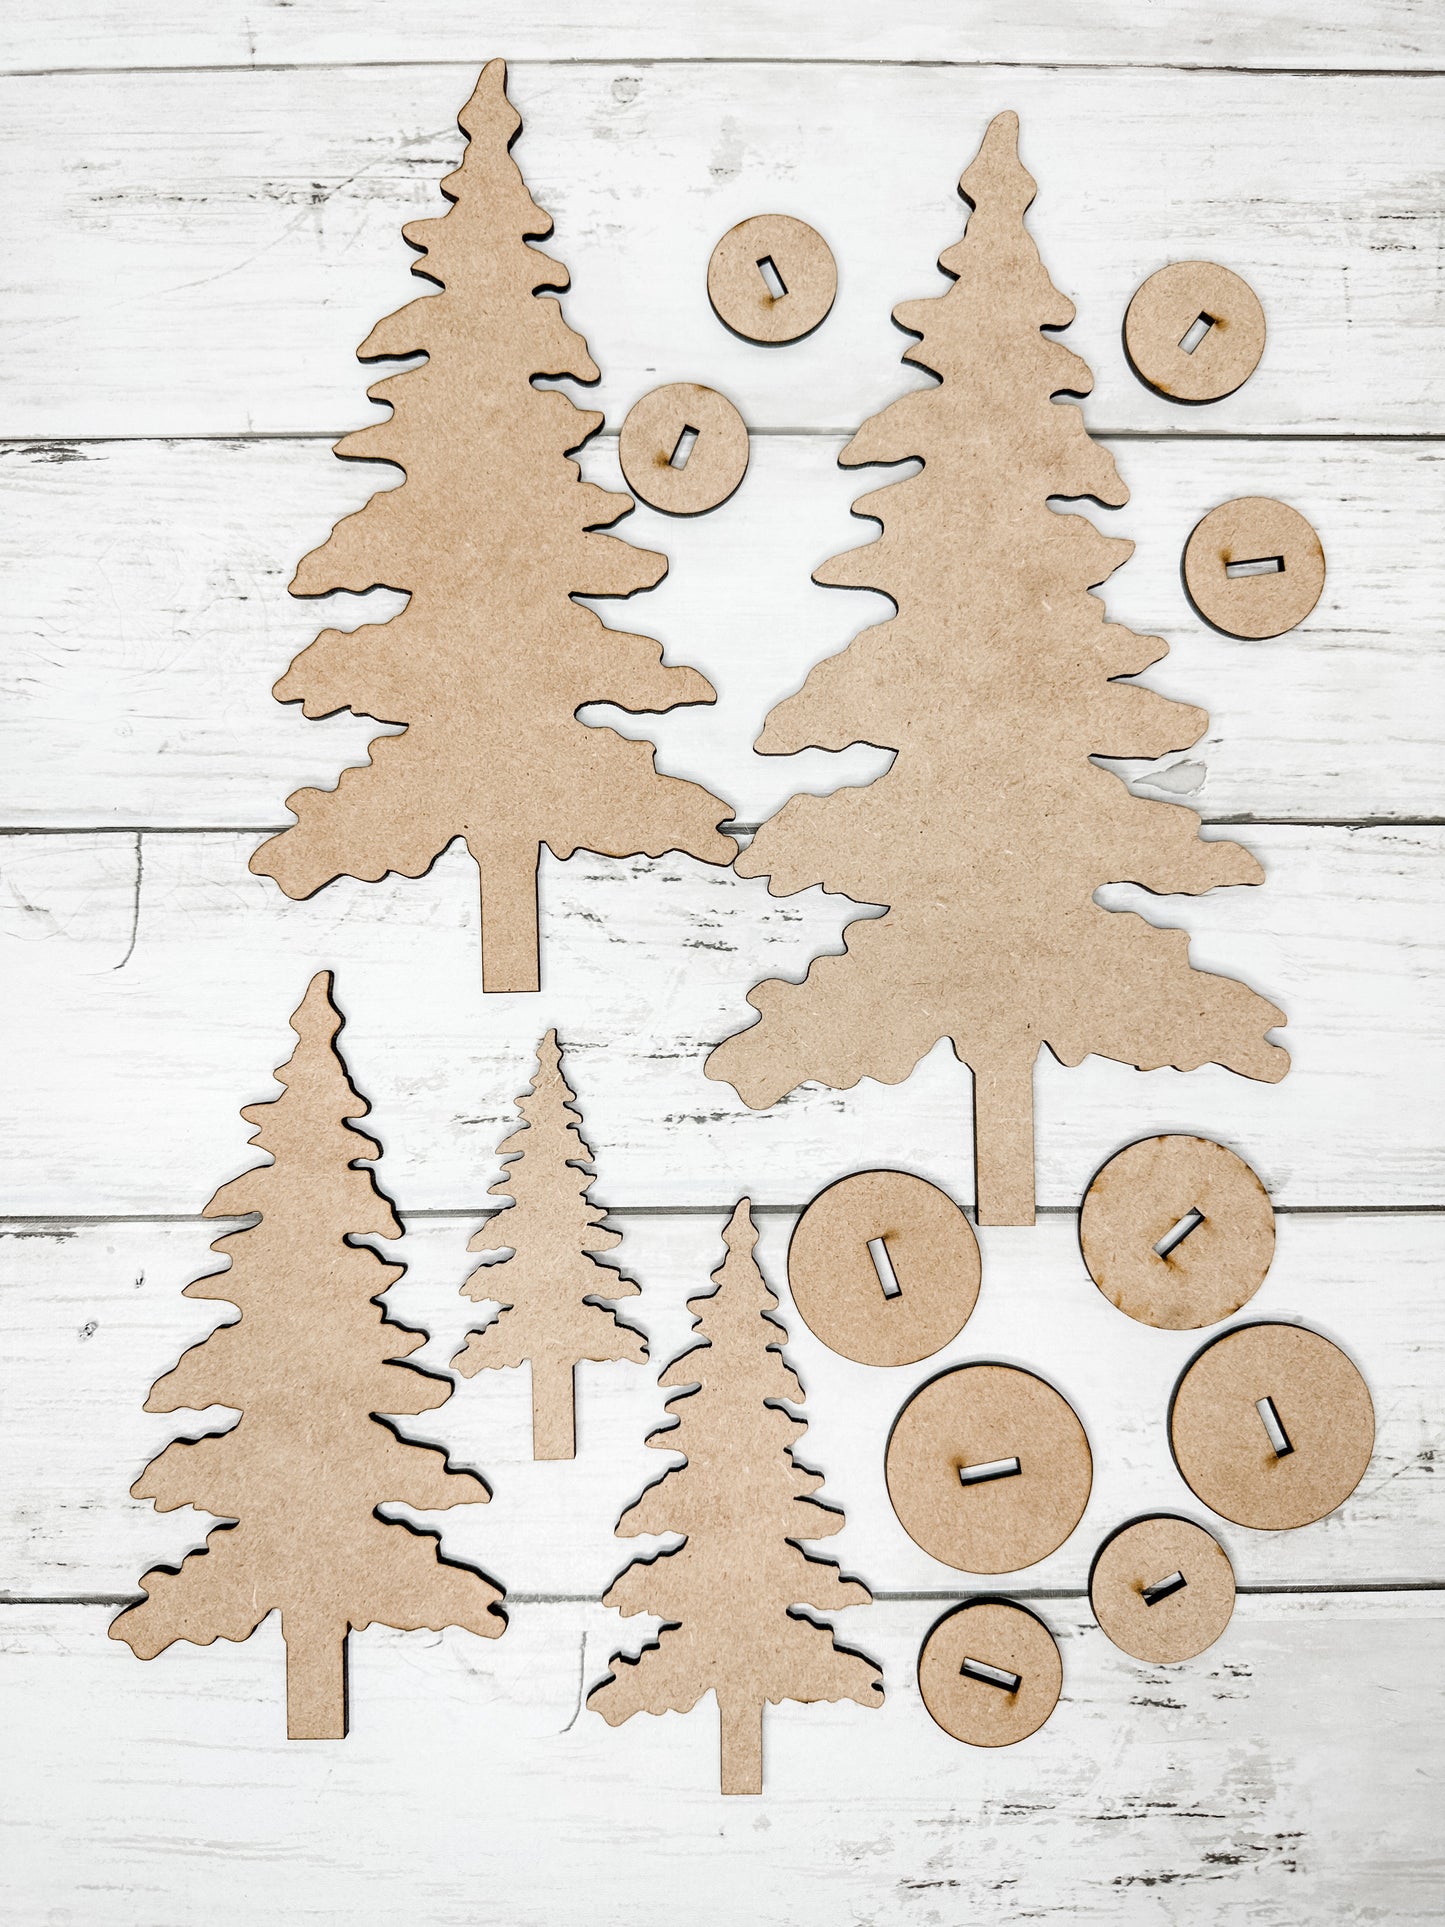 Winter Pine Trees with stands DIY Kit